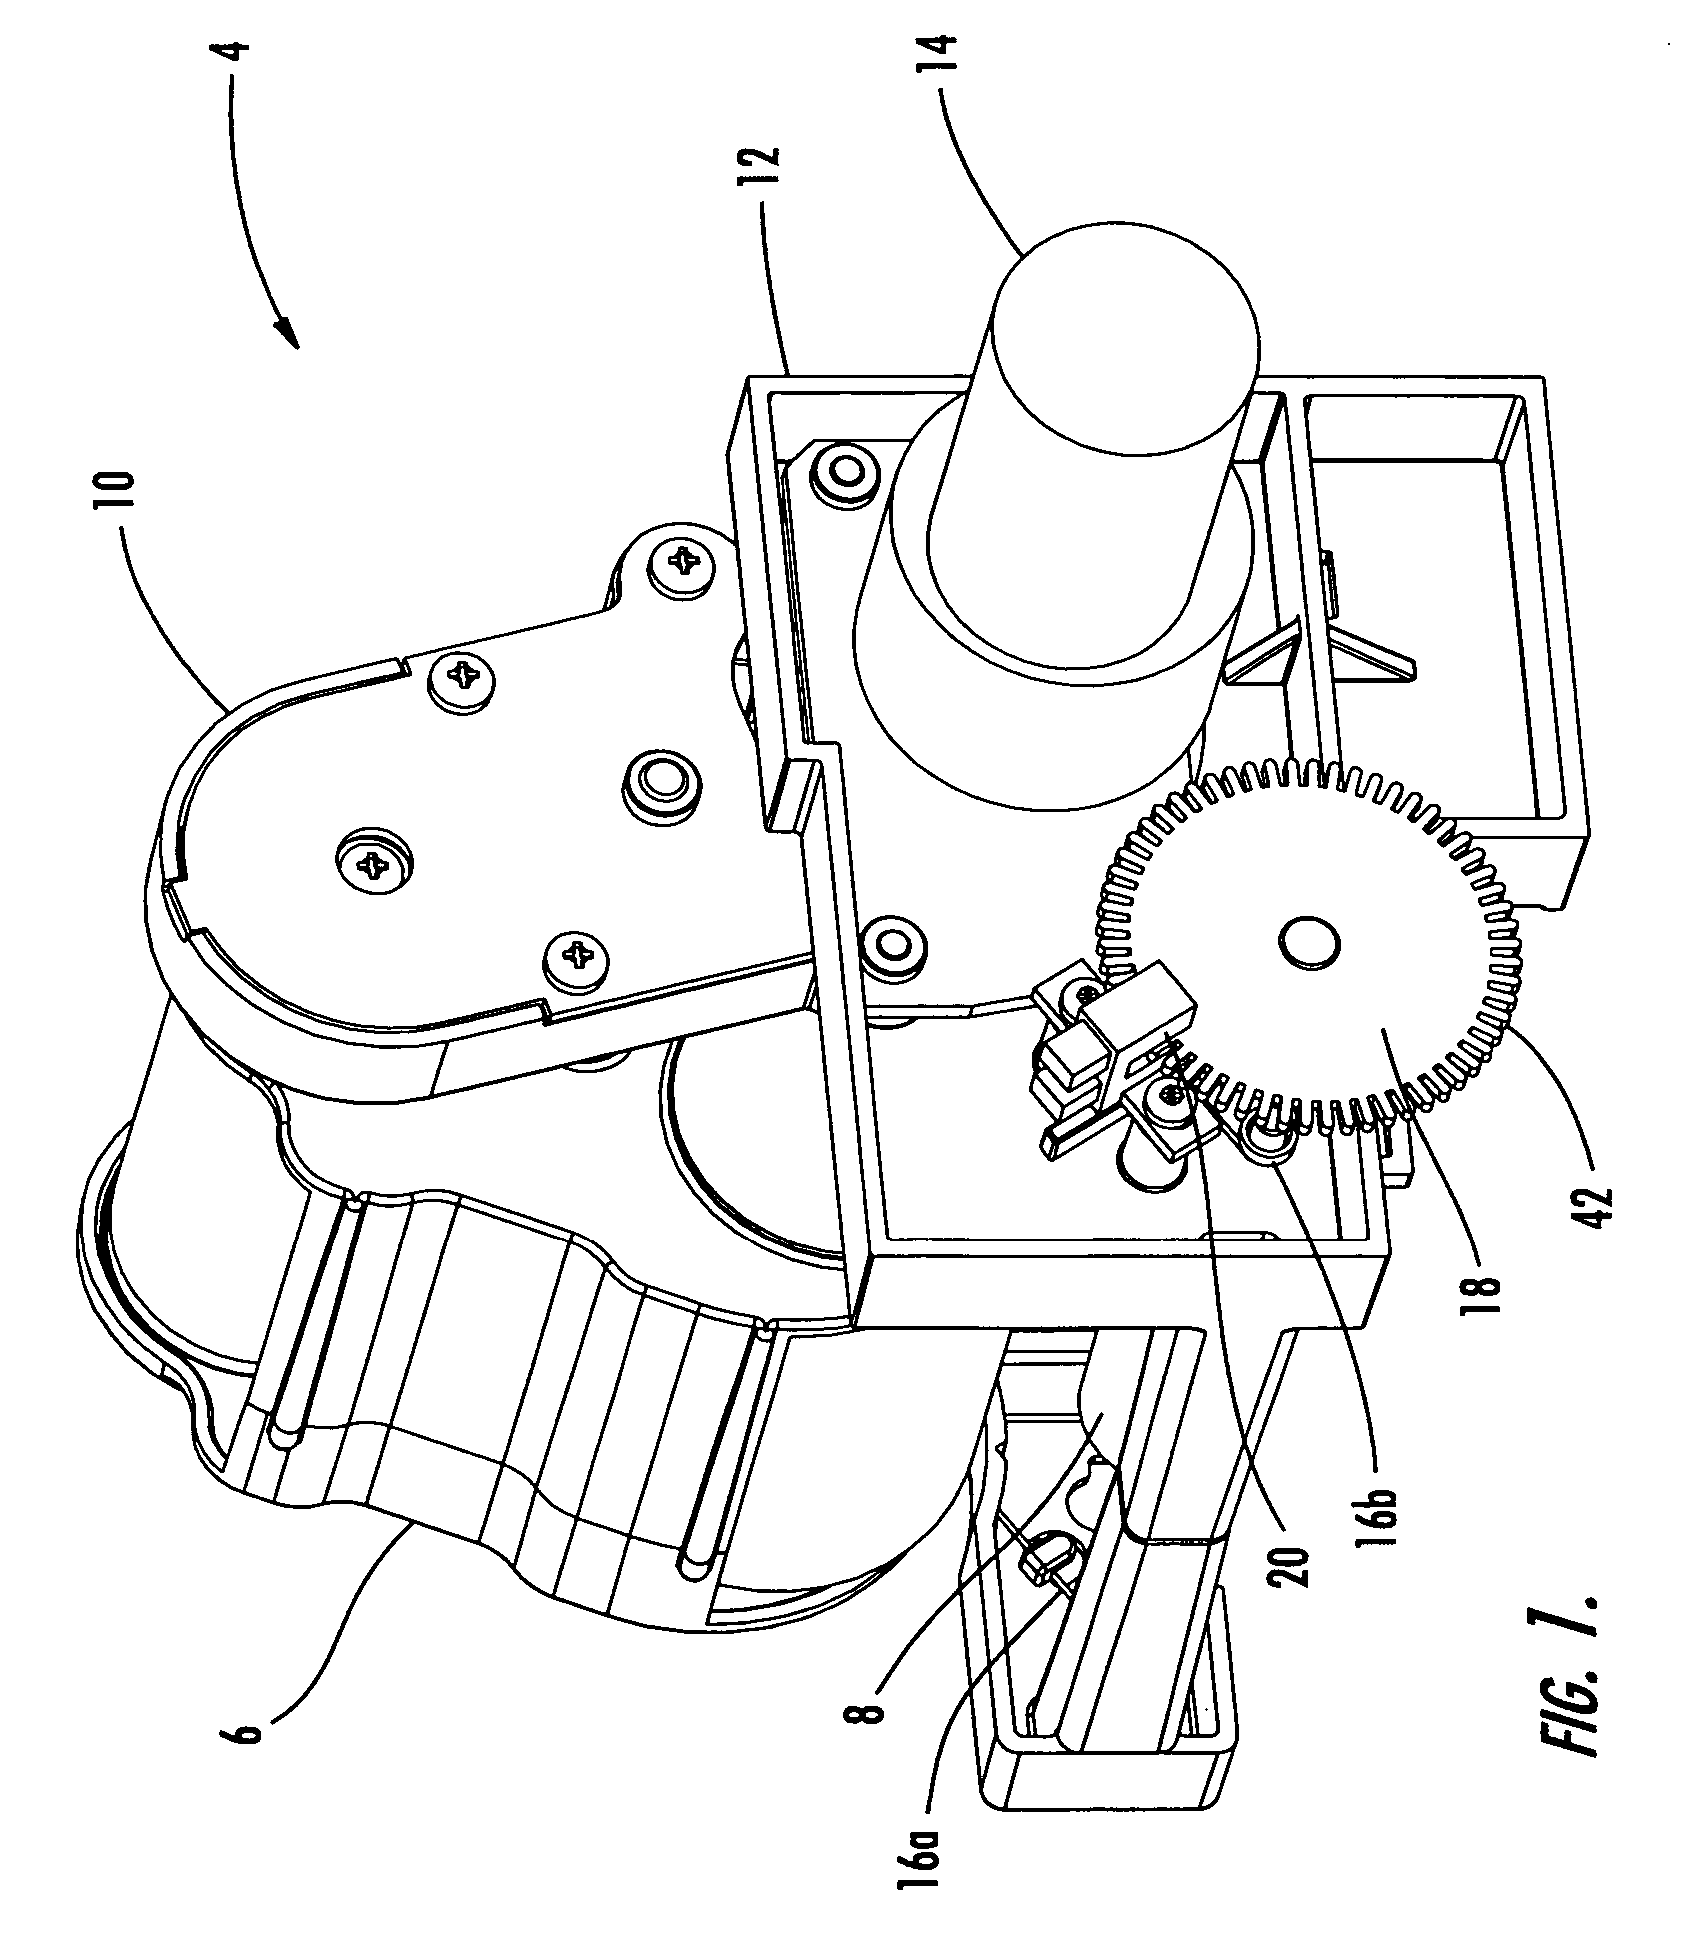 Card-cleaning assembly for card printing devices